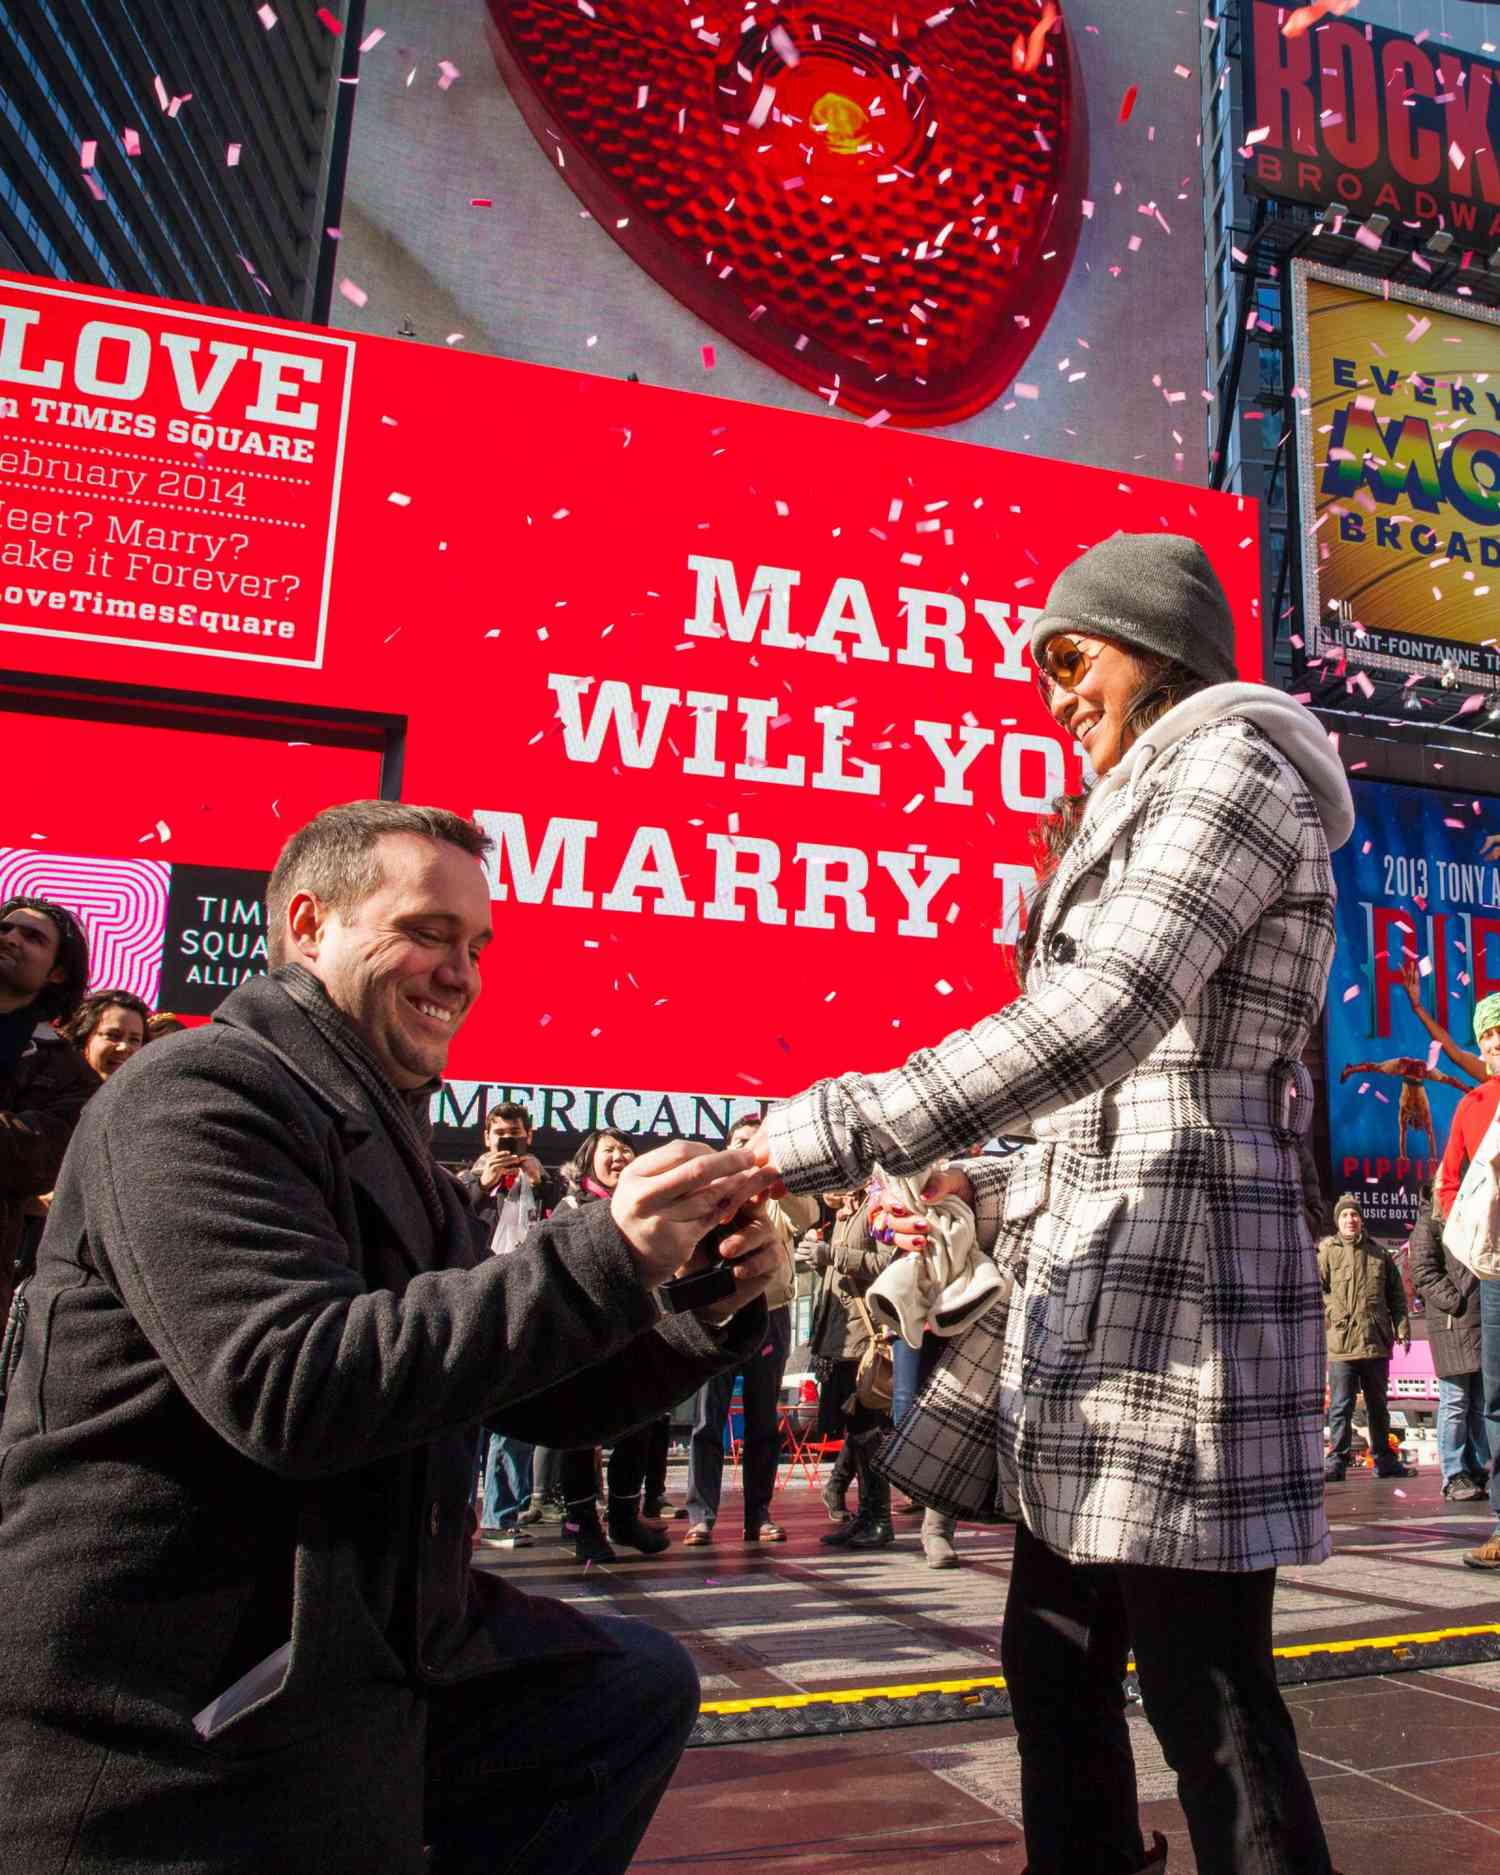 nyc-proposal-spot-times-square-valentines-day-1114.jpg